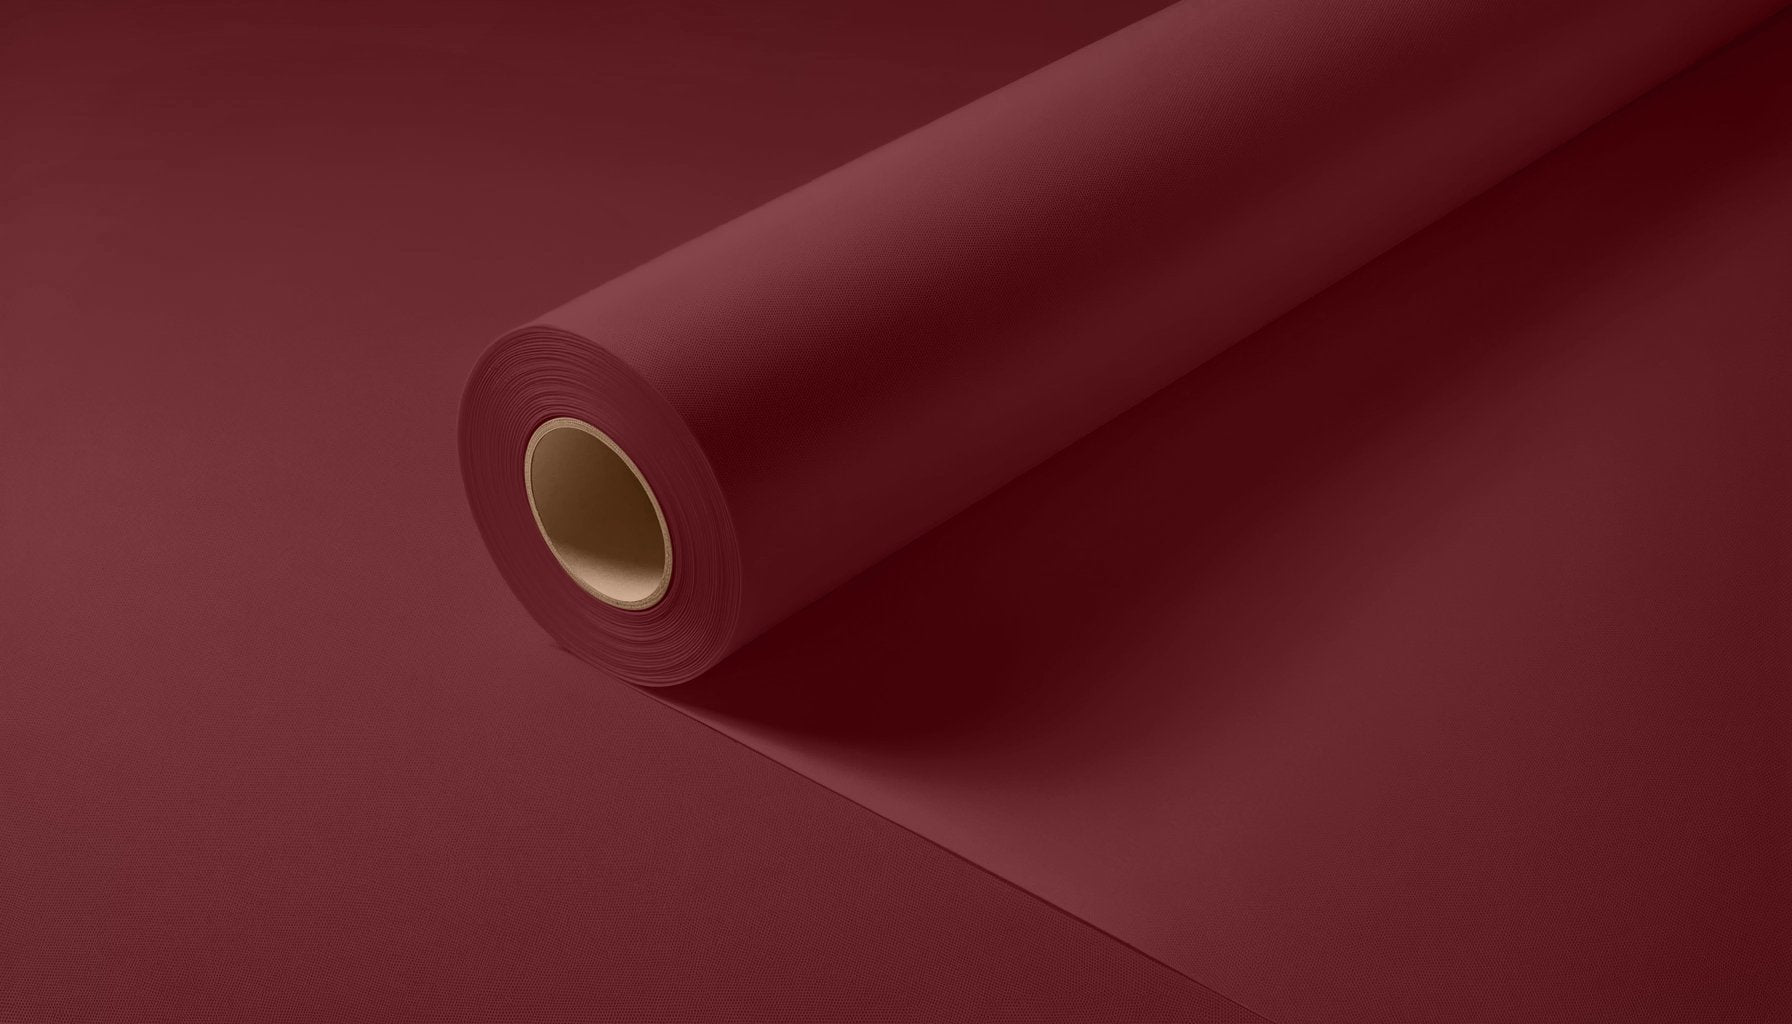 Peel & Stick Removable Re-usable Paint - Color RAL 3005 Wine Red - offRAL™ - RALRAW LLC, USA